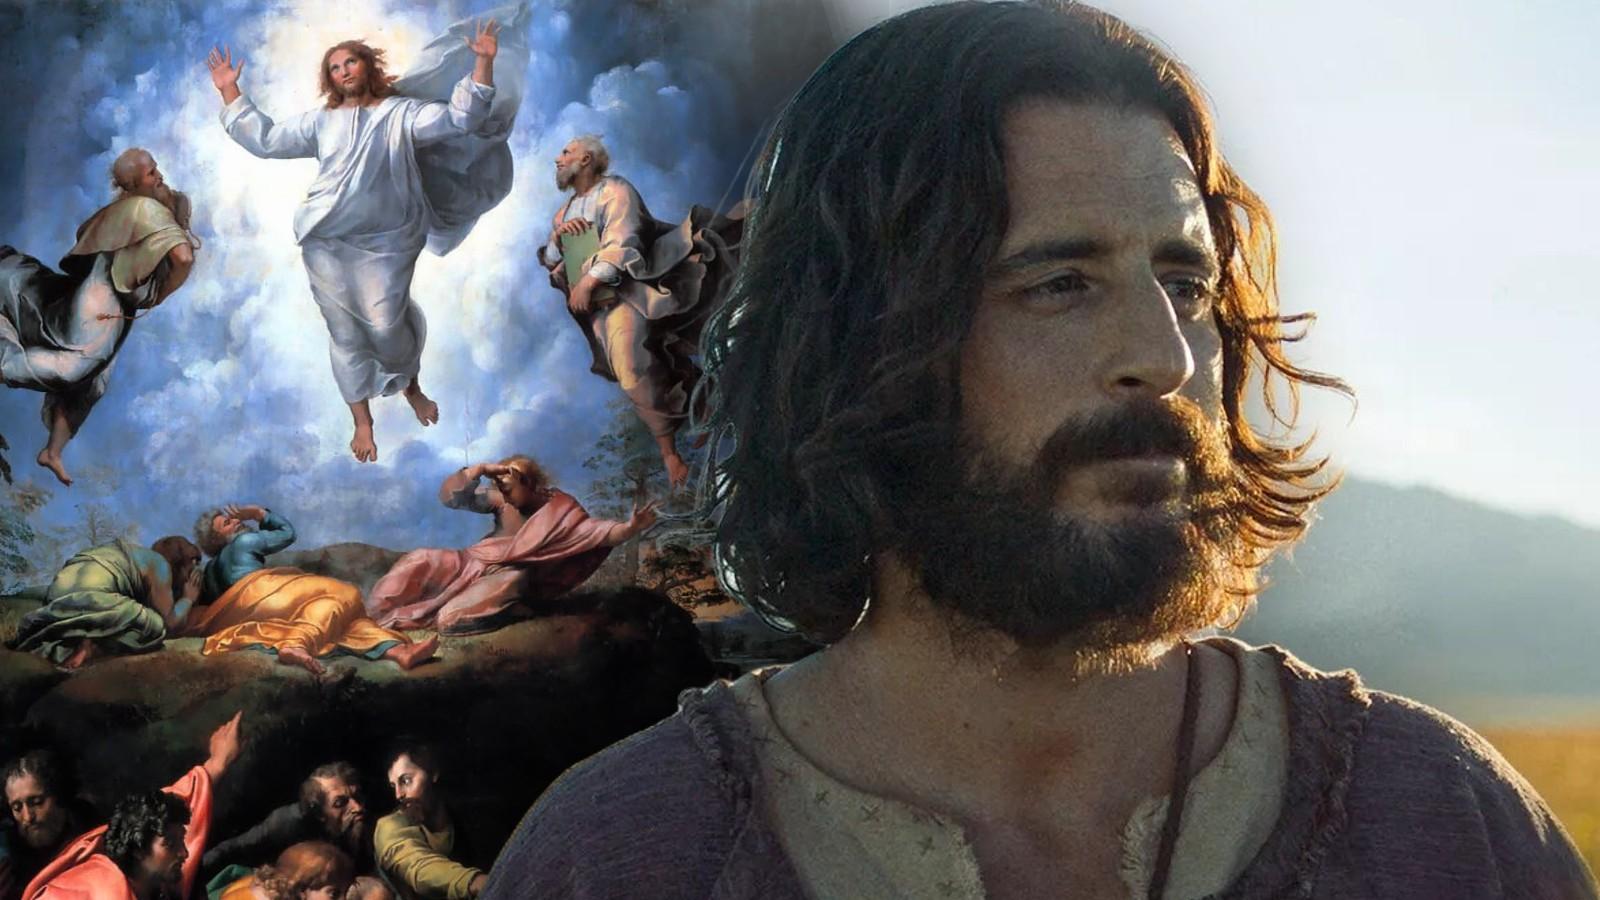 Jonathan Roumie as Jesus and a scene of the transfiguration